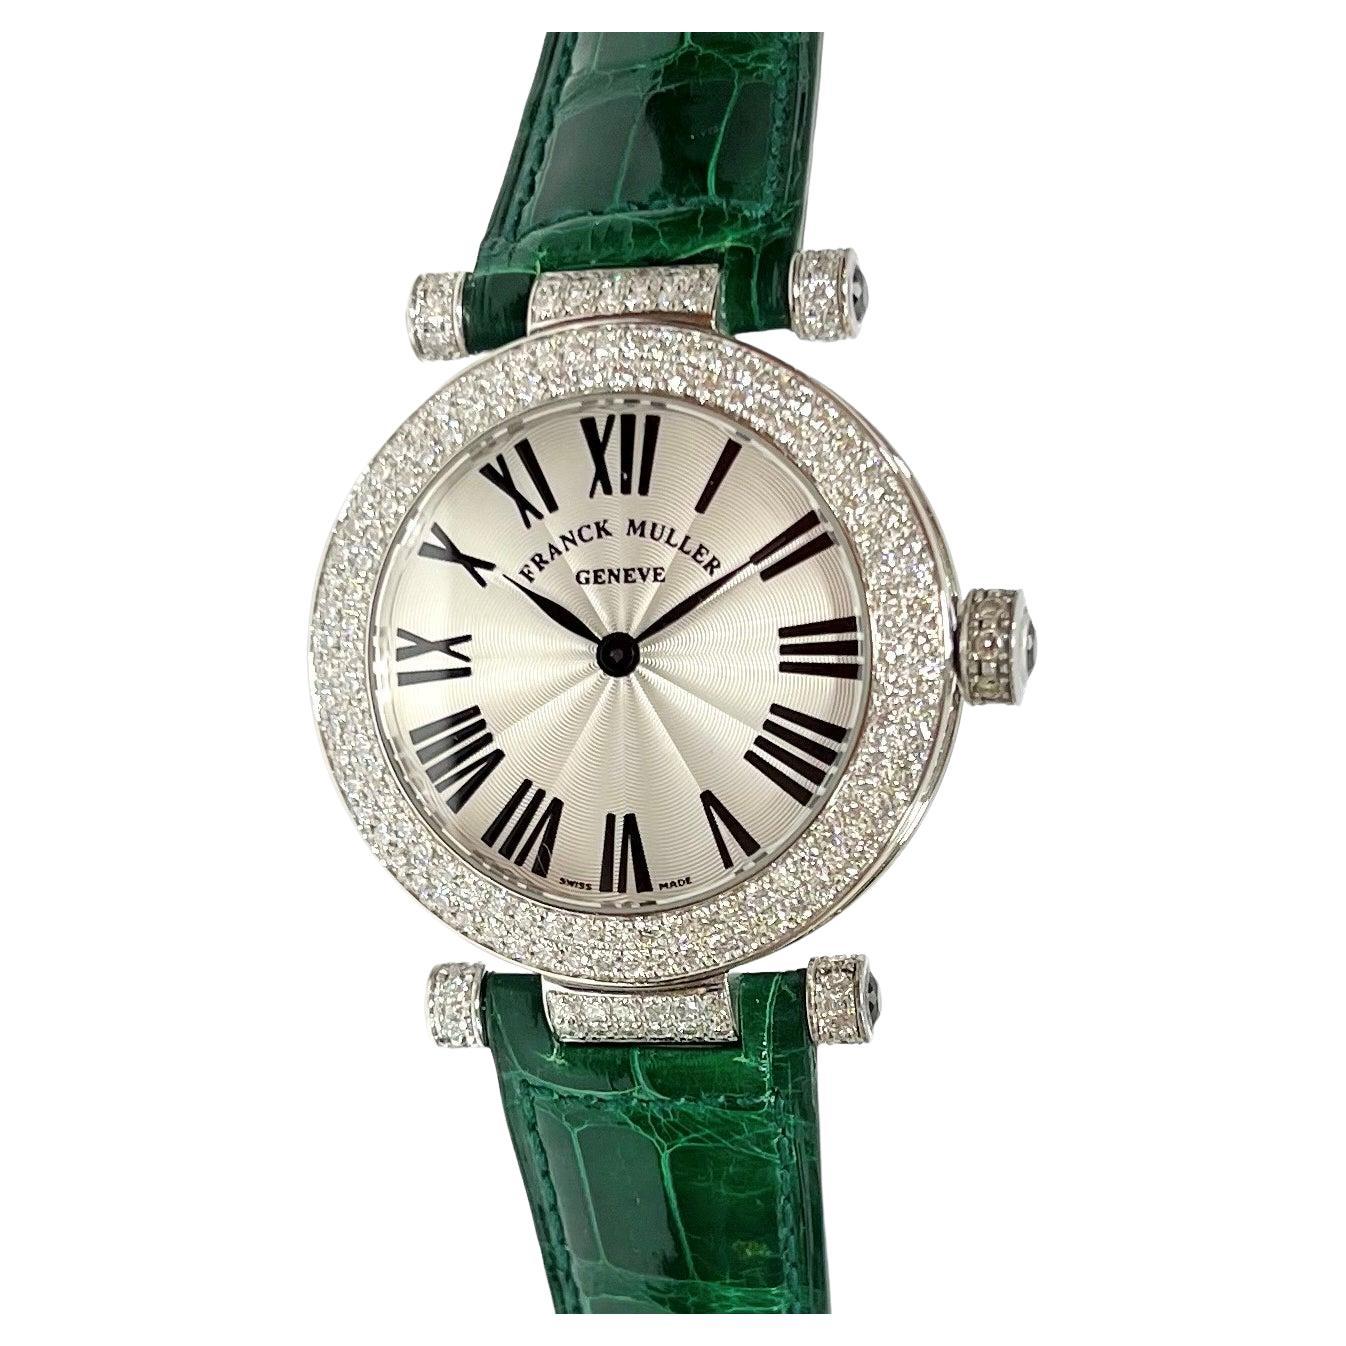 Franck Muller White Gold and Diamonds Ronde Watch